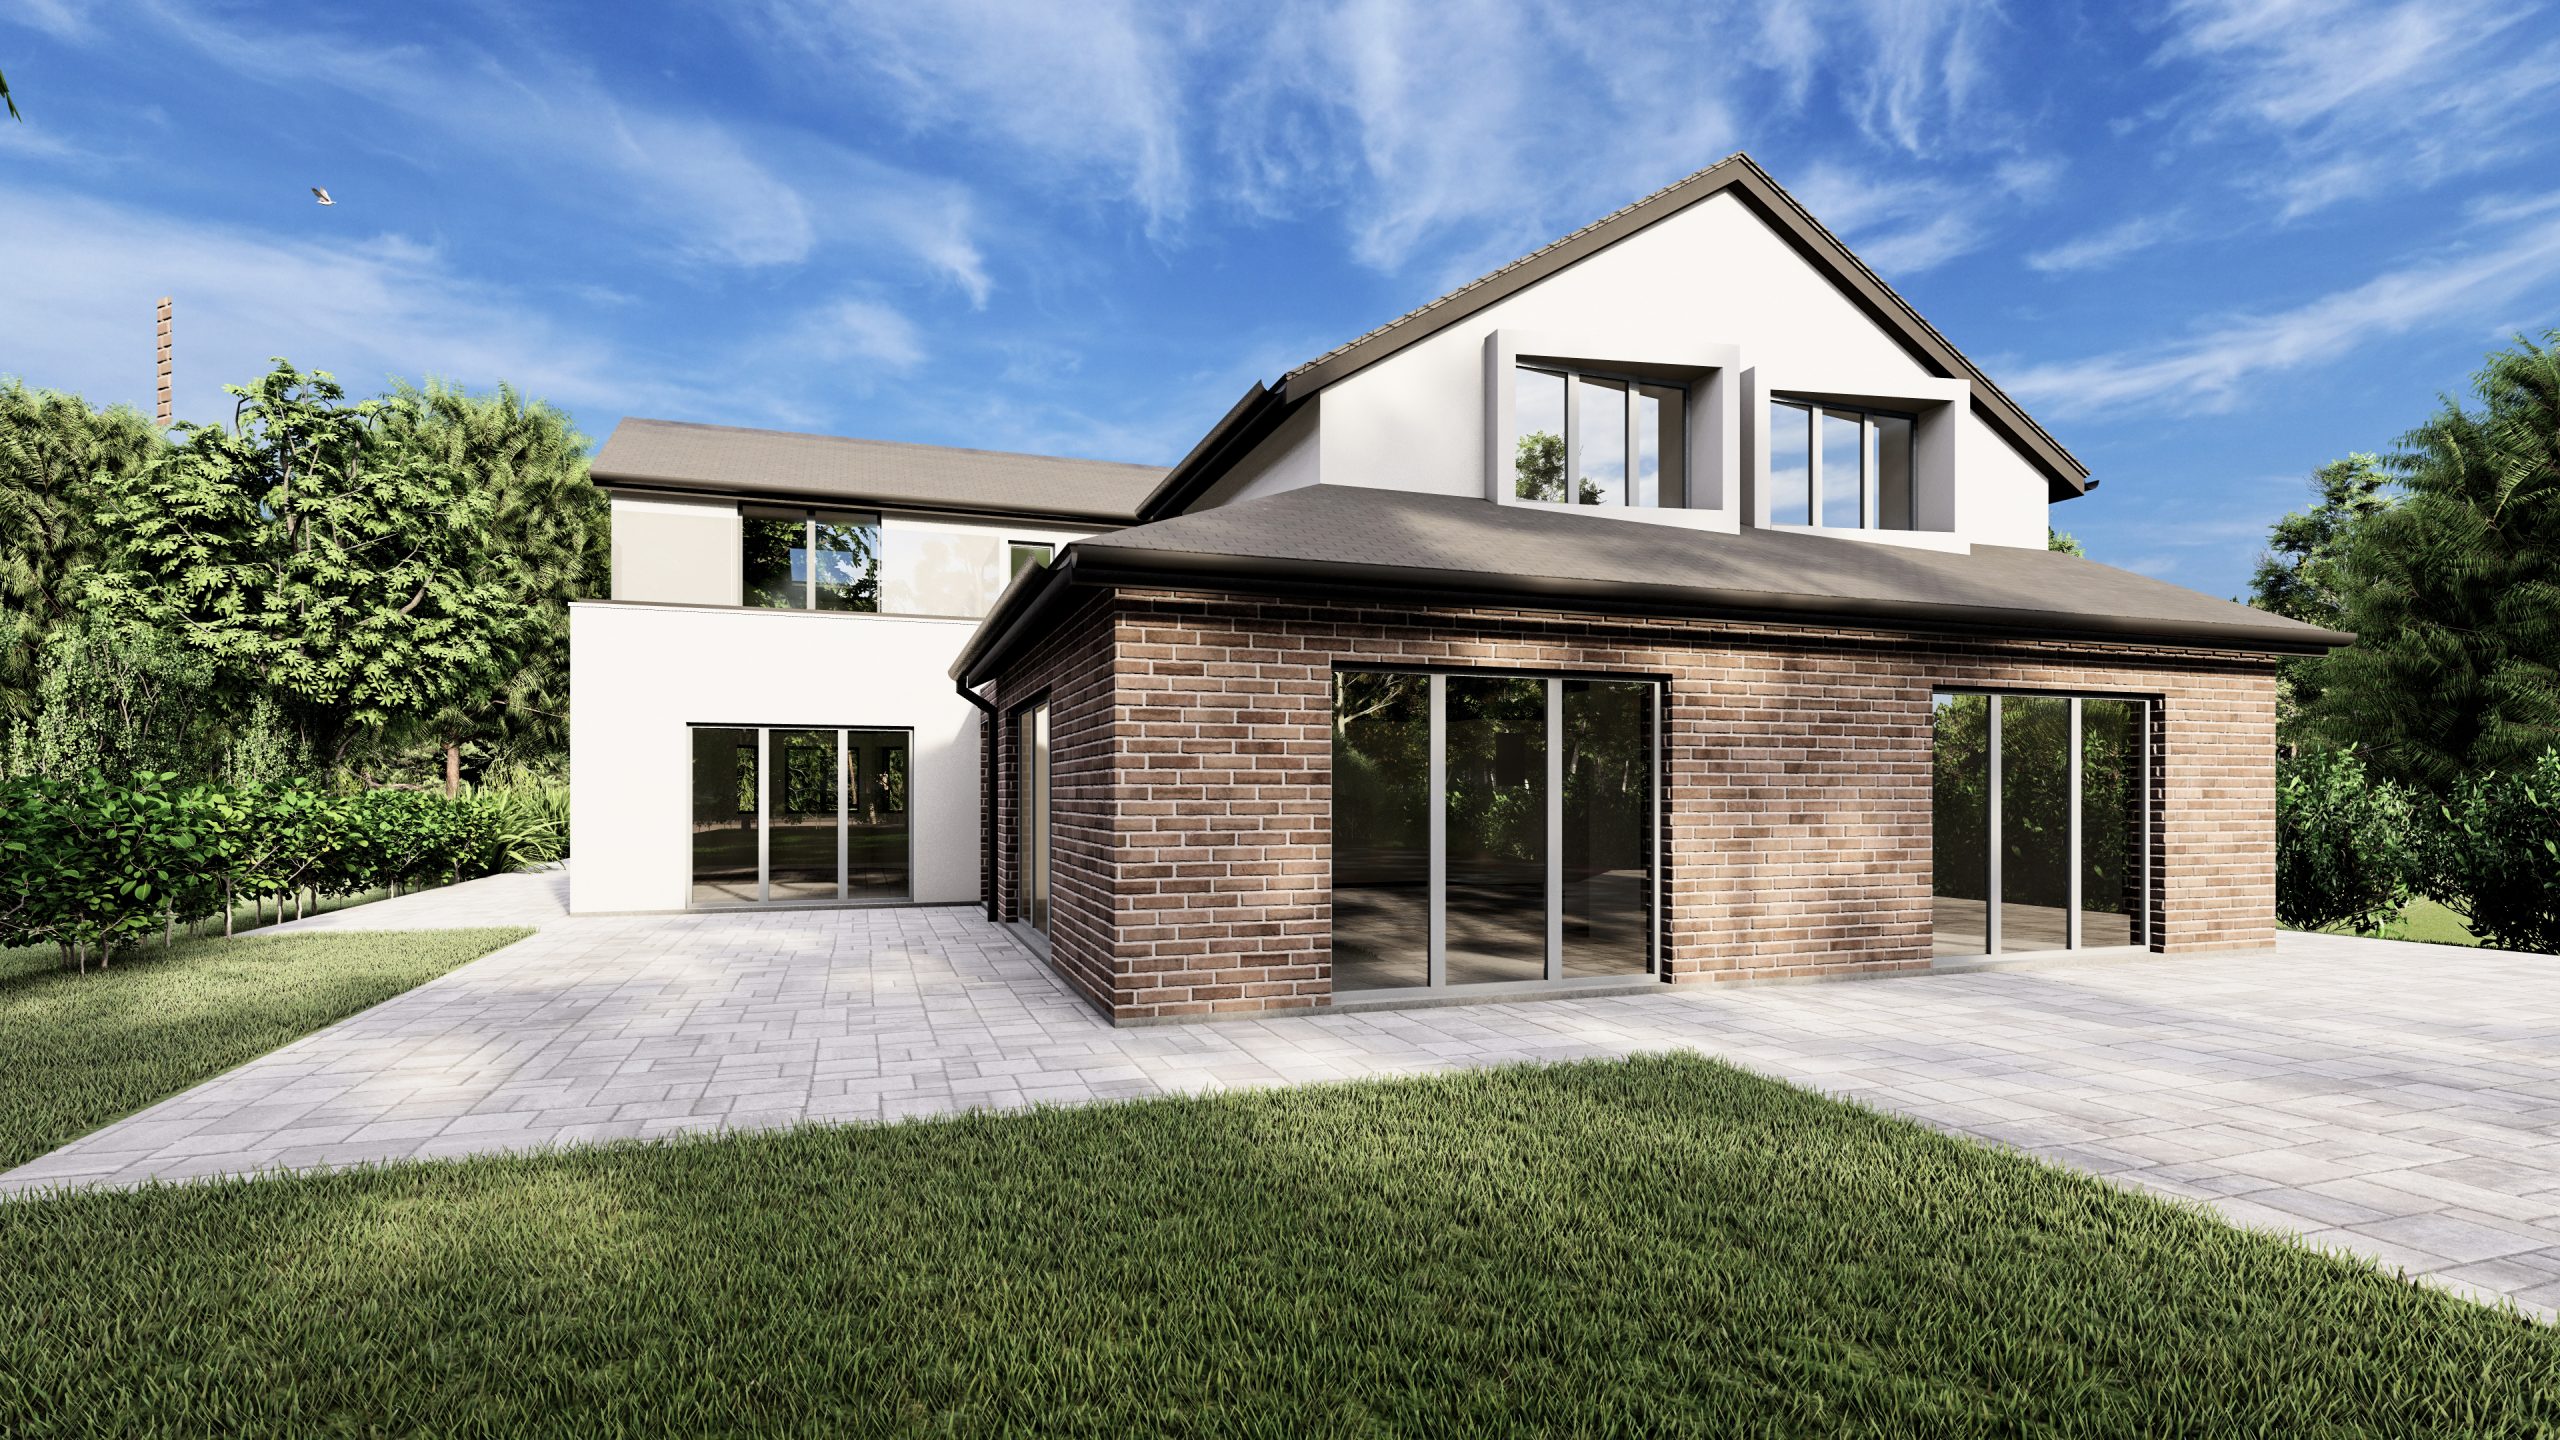 3d render from 2d floor plan created by home visuals